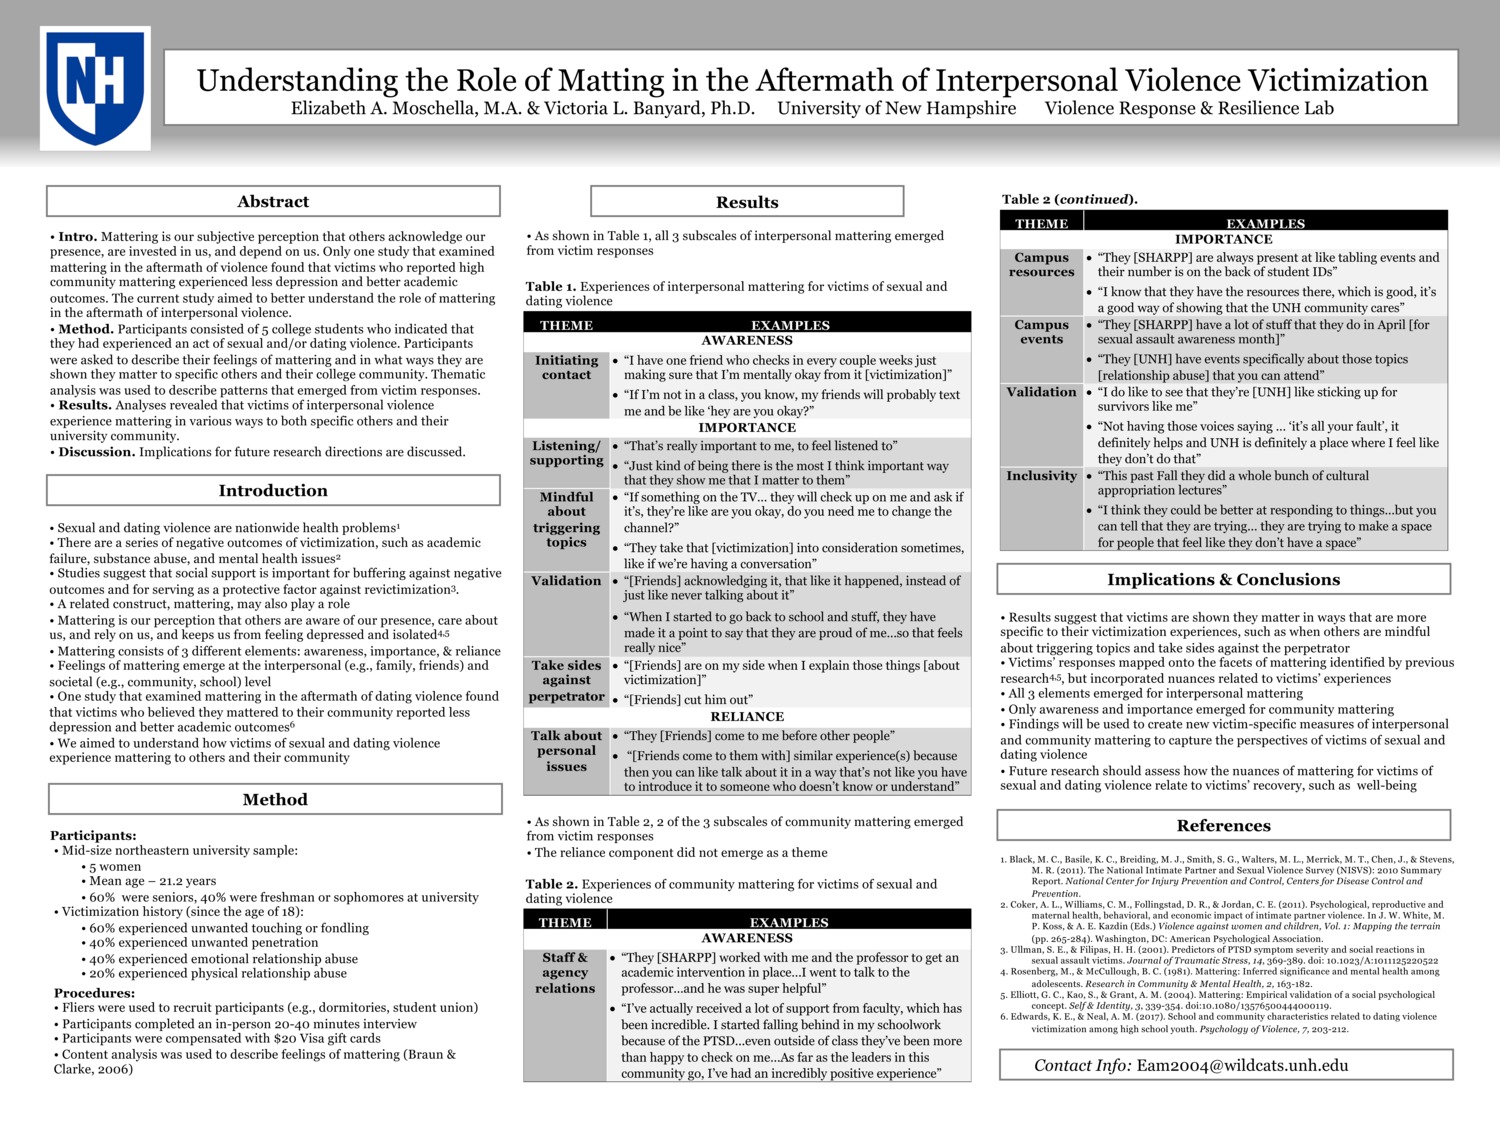 Understanding The Role Of Matting In The Aftermath Of Interpersonal Violence Victimization by eam2004